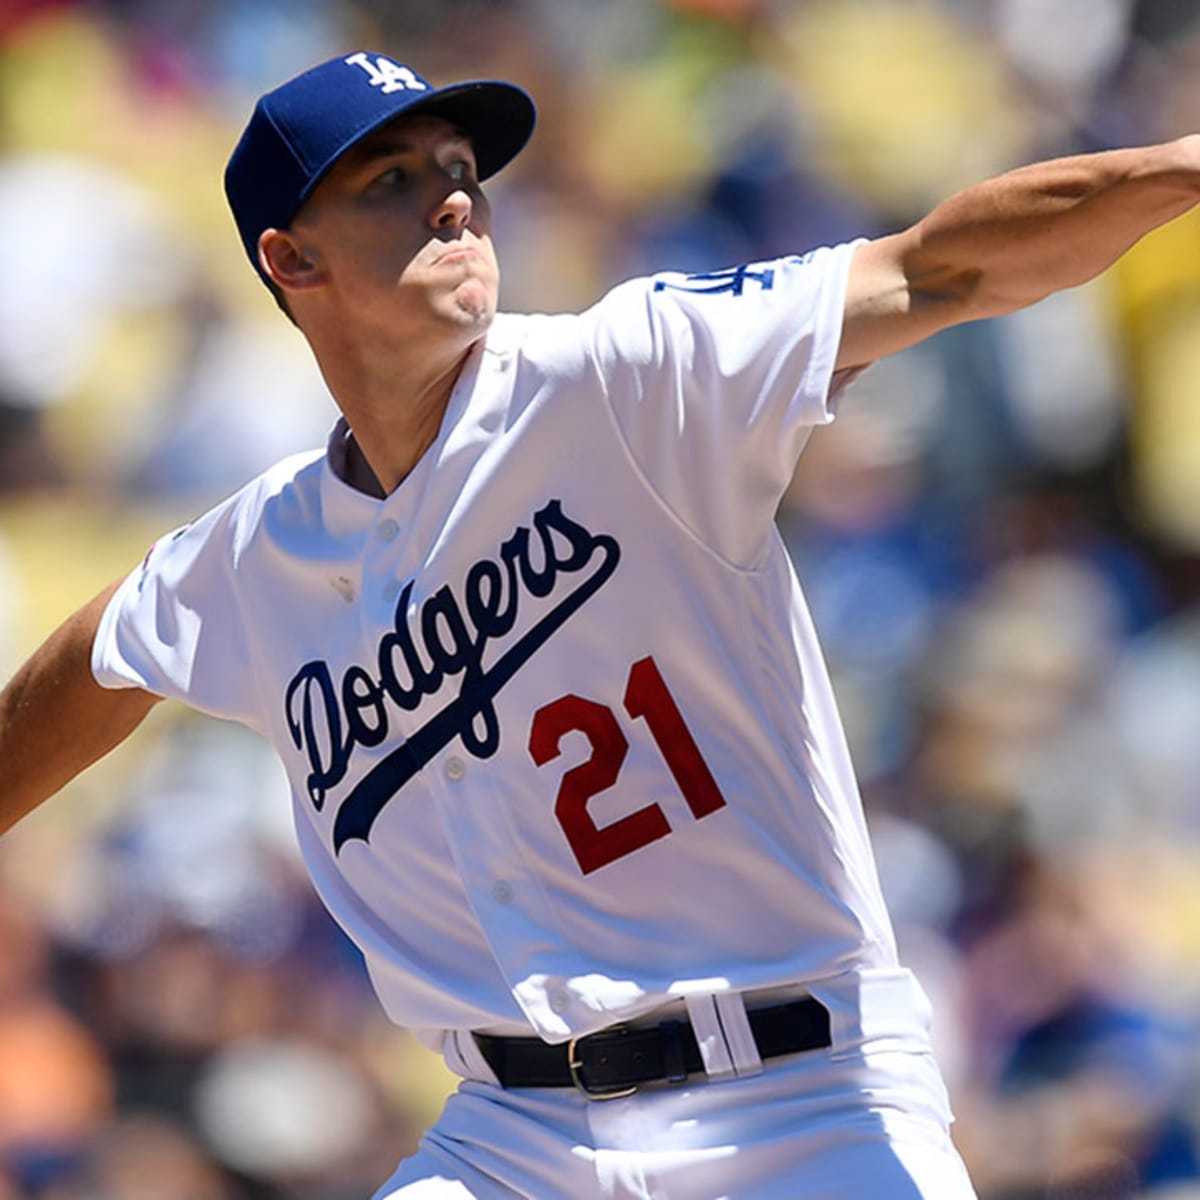 Walker Buehler has the look of an all-time Dodgers great - Sports